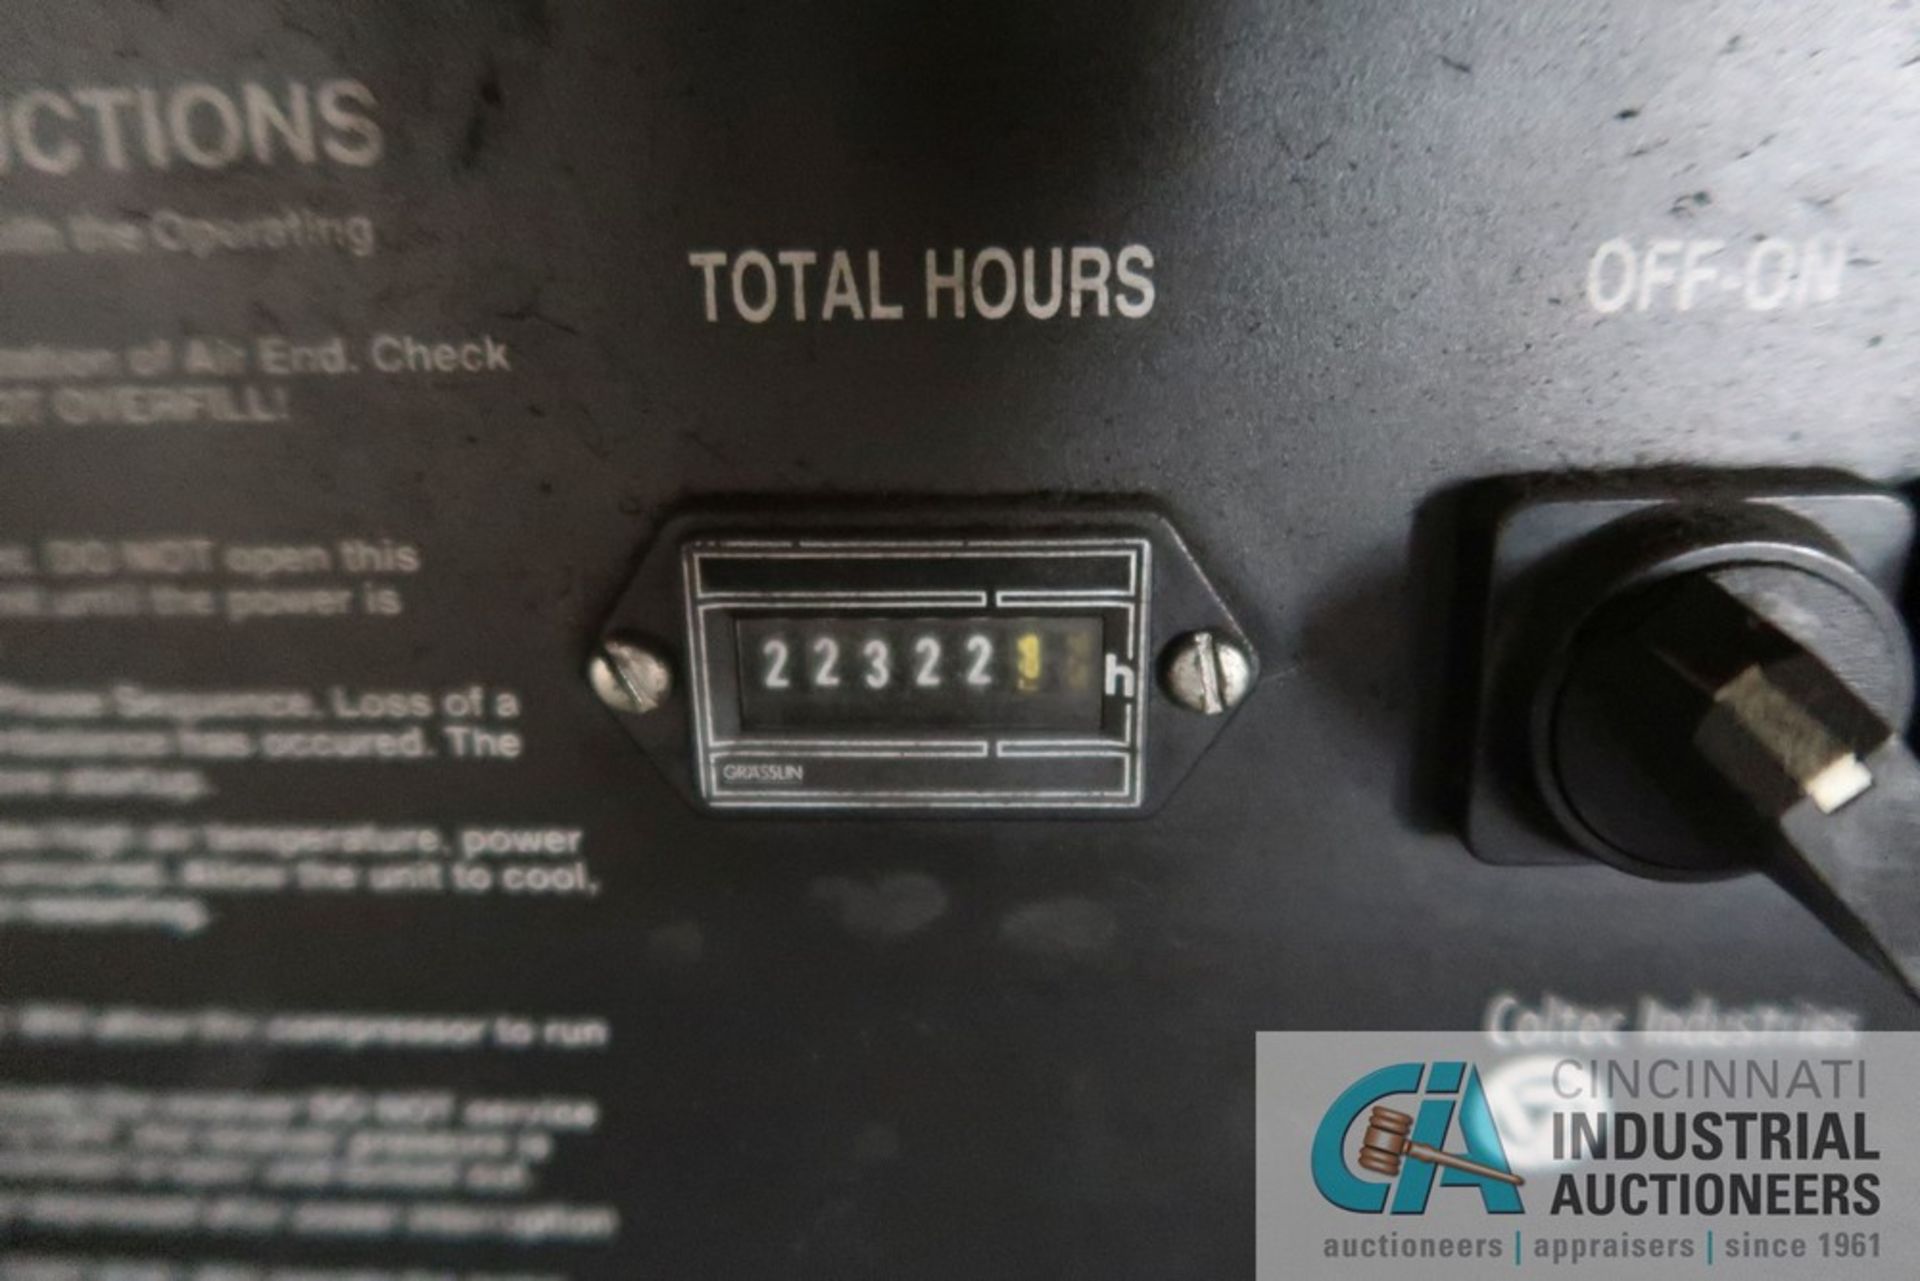 QUINCY AIR COMPRESSOR MODEL OMBCACA81B; S/N 82160, 223,221 HOURS, 230 VOLTS - Image 3 of 5